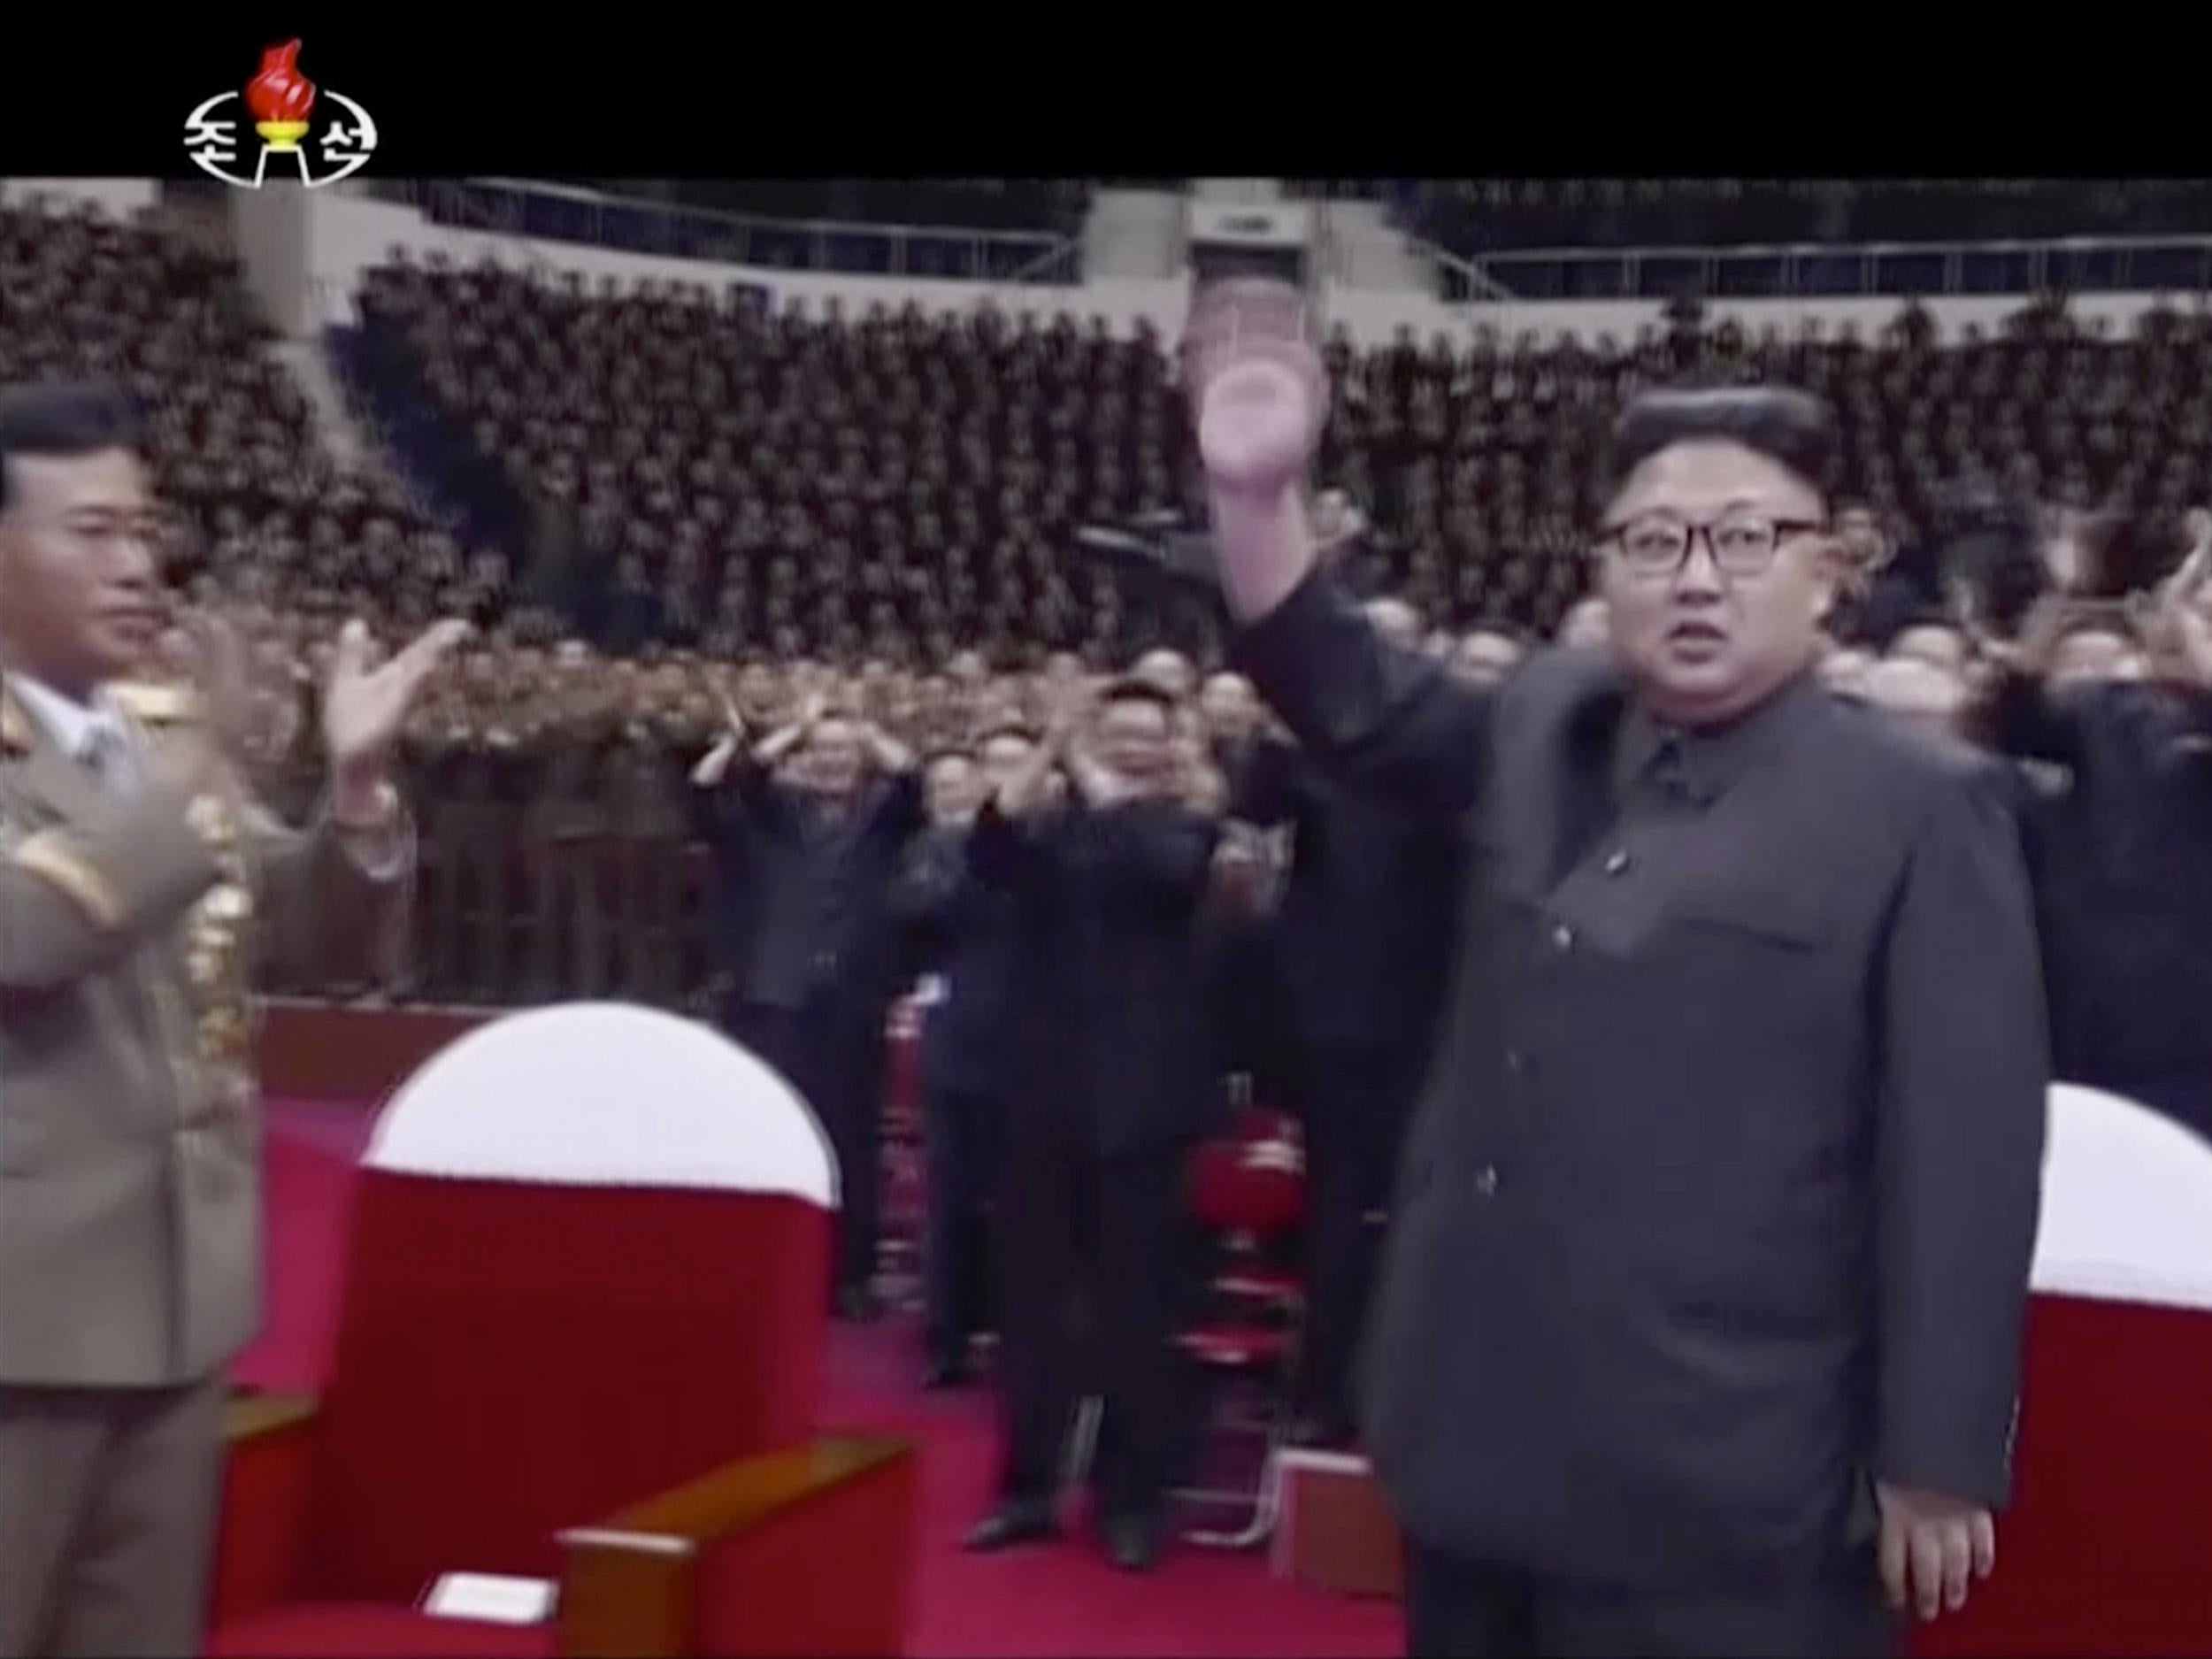 Kim Jong-un waves to the audience in Pyongyang